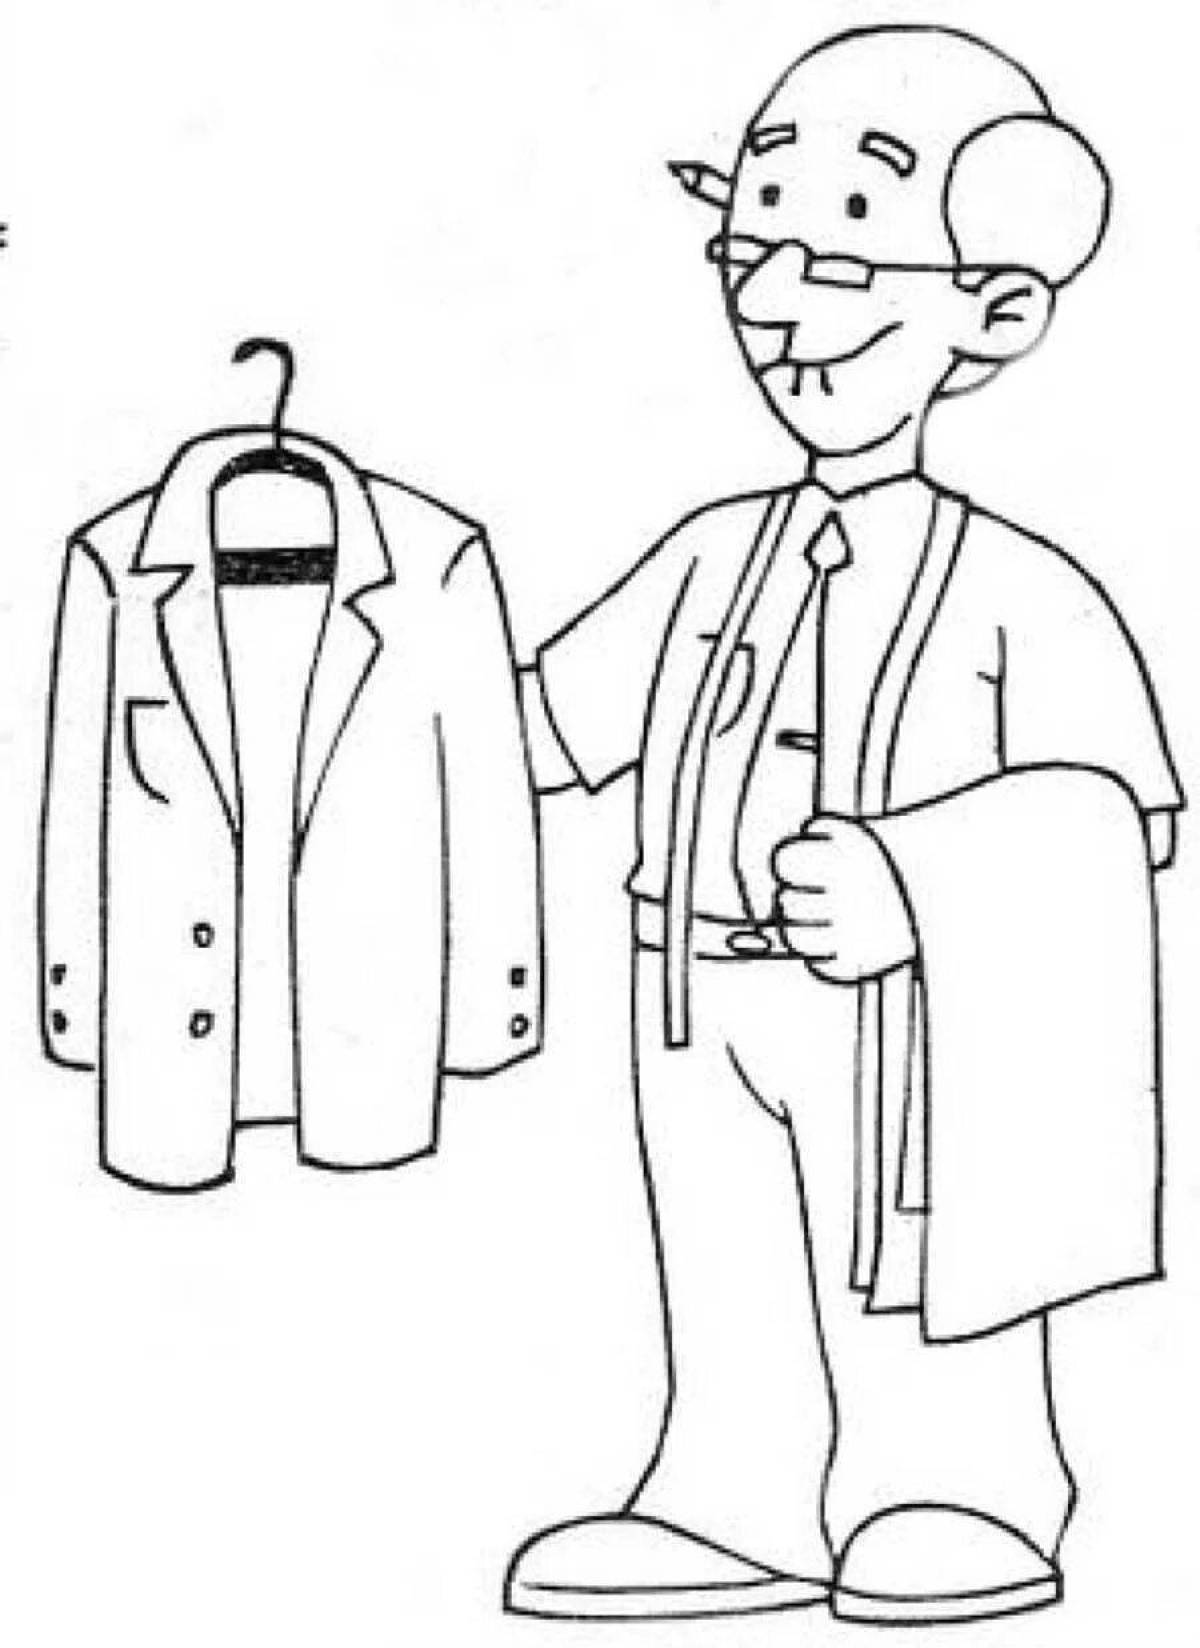 Tailor coloring page